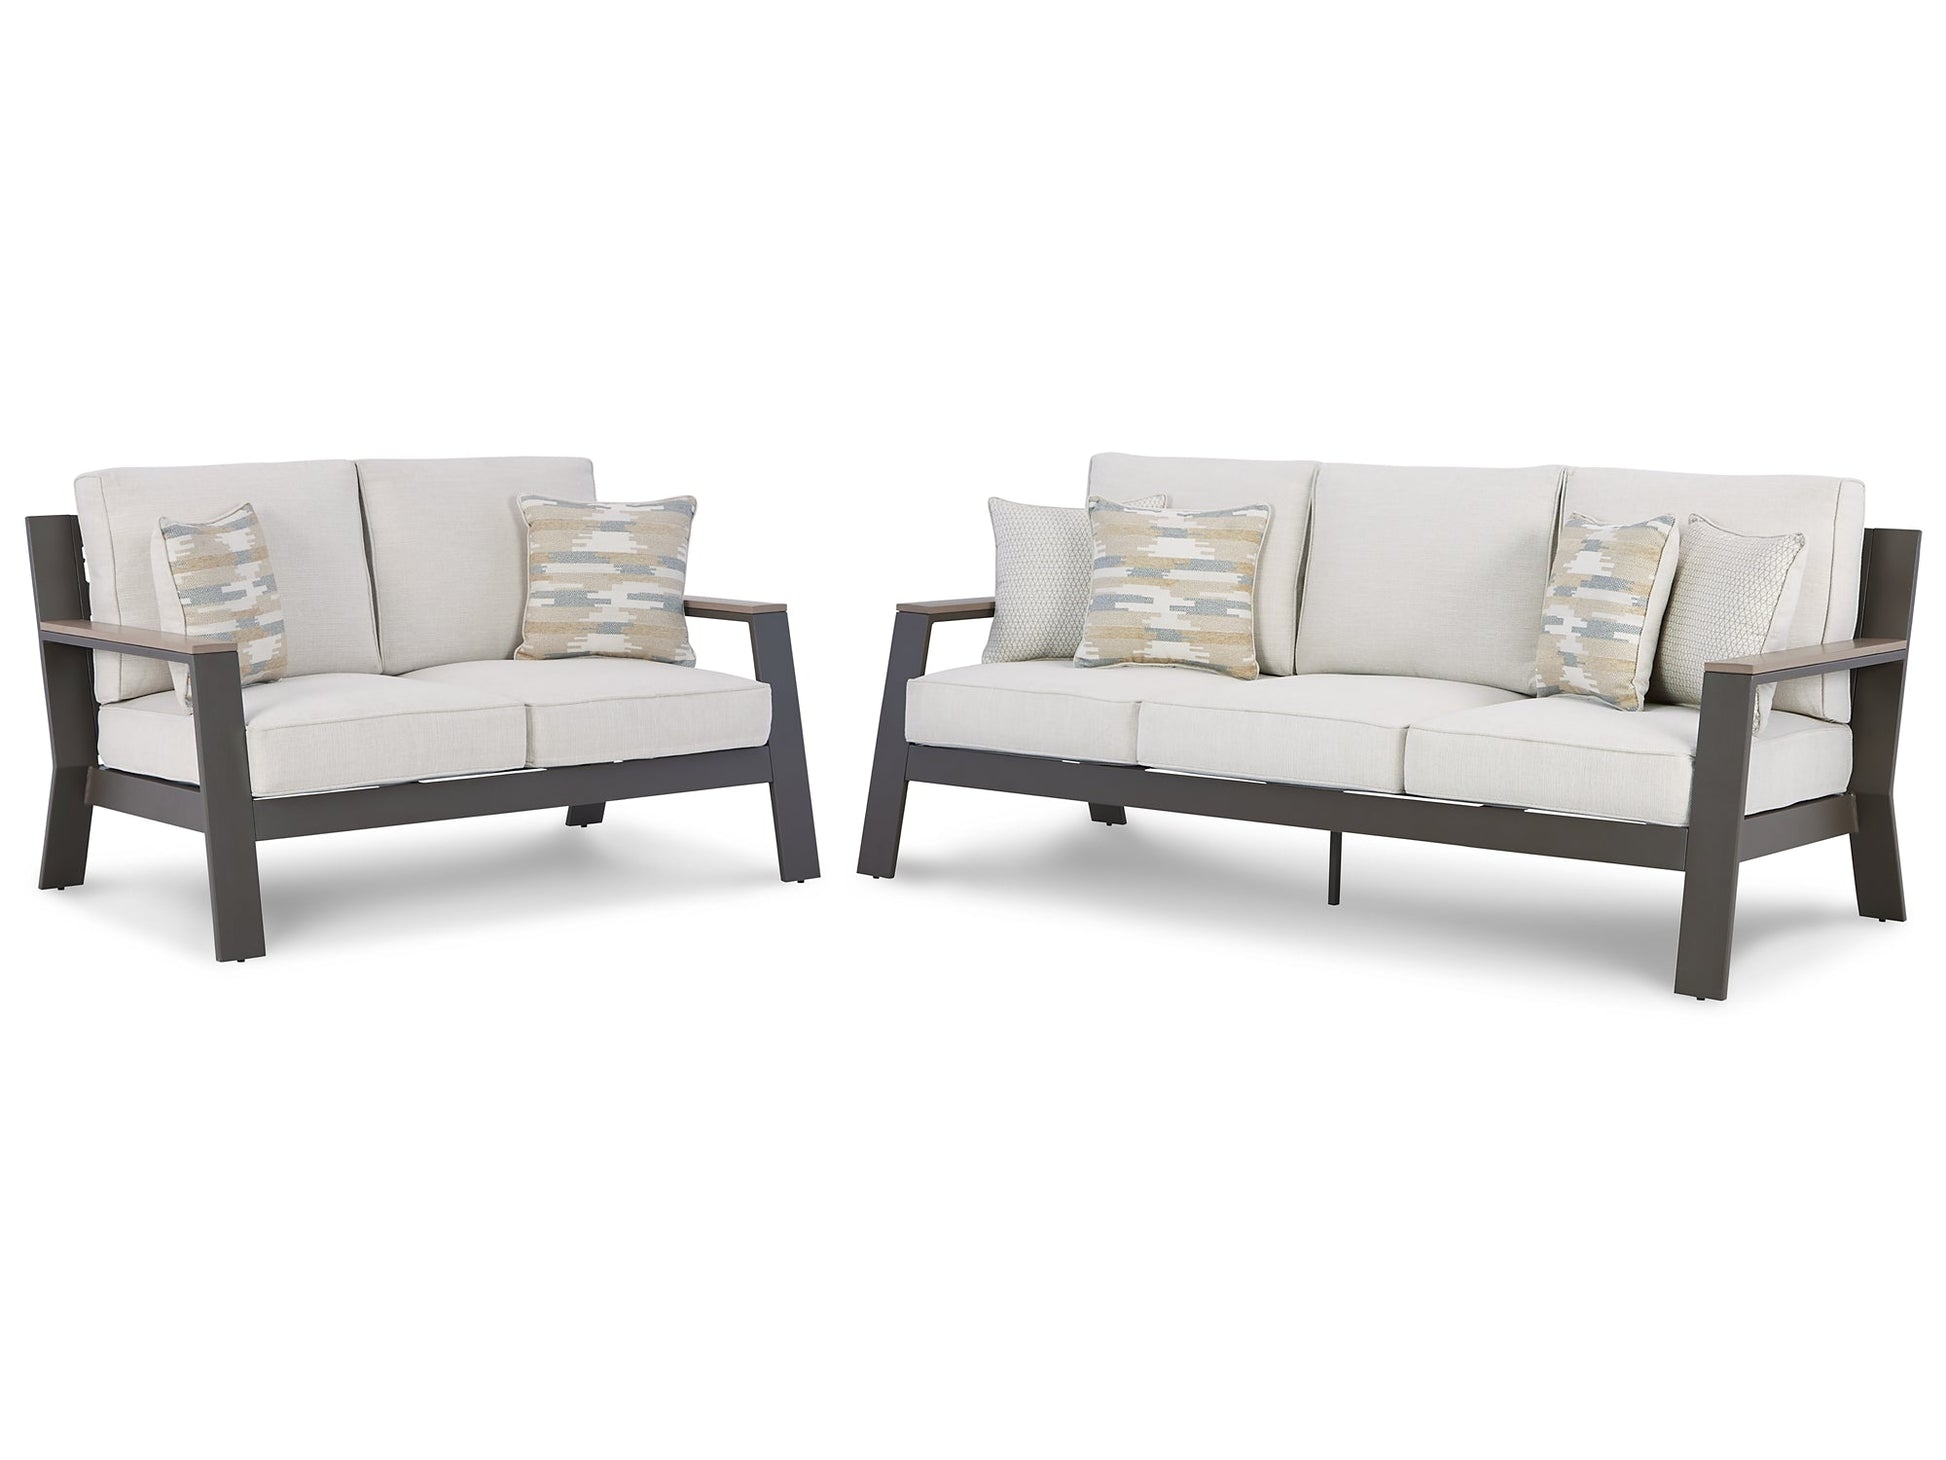 Tropicava Outdoor Sofa and Loveseat at Walker Mattress and Furniture Locations in Cedar Park and Belton TX.